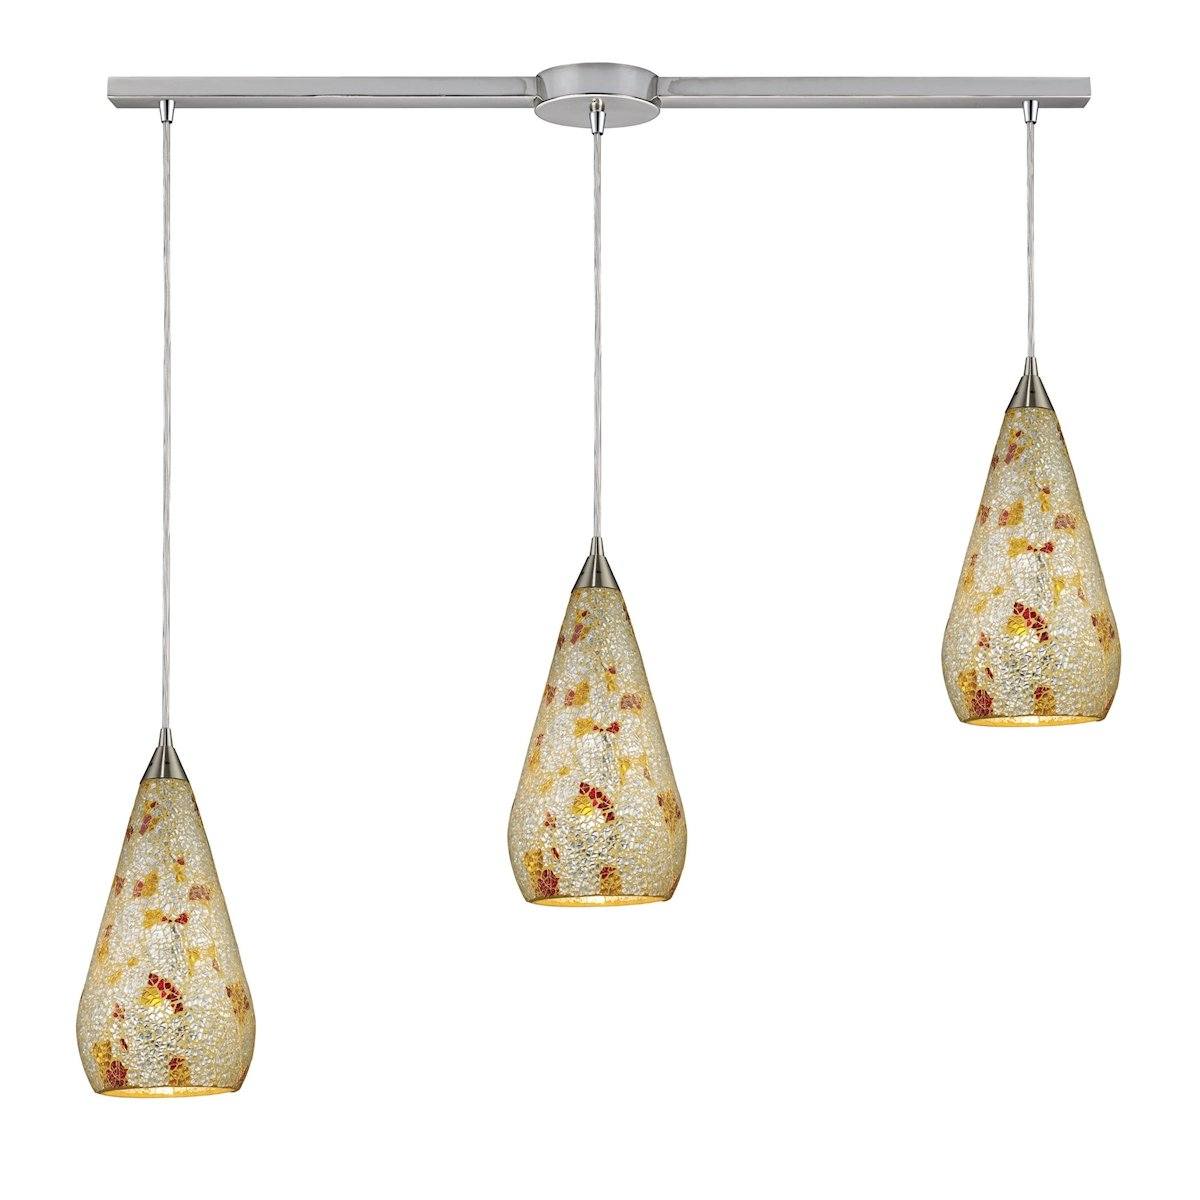 Curvalo 3 Light Pendant In Satin Nickel And Silver Multi Crackle Glass Ceiling Elk Lighting 